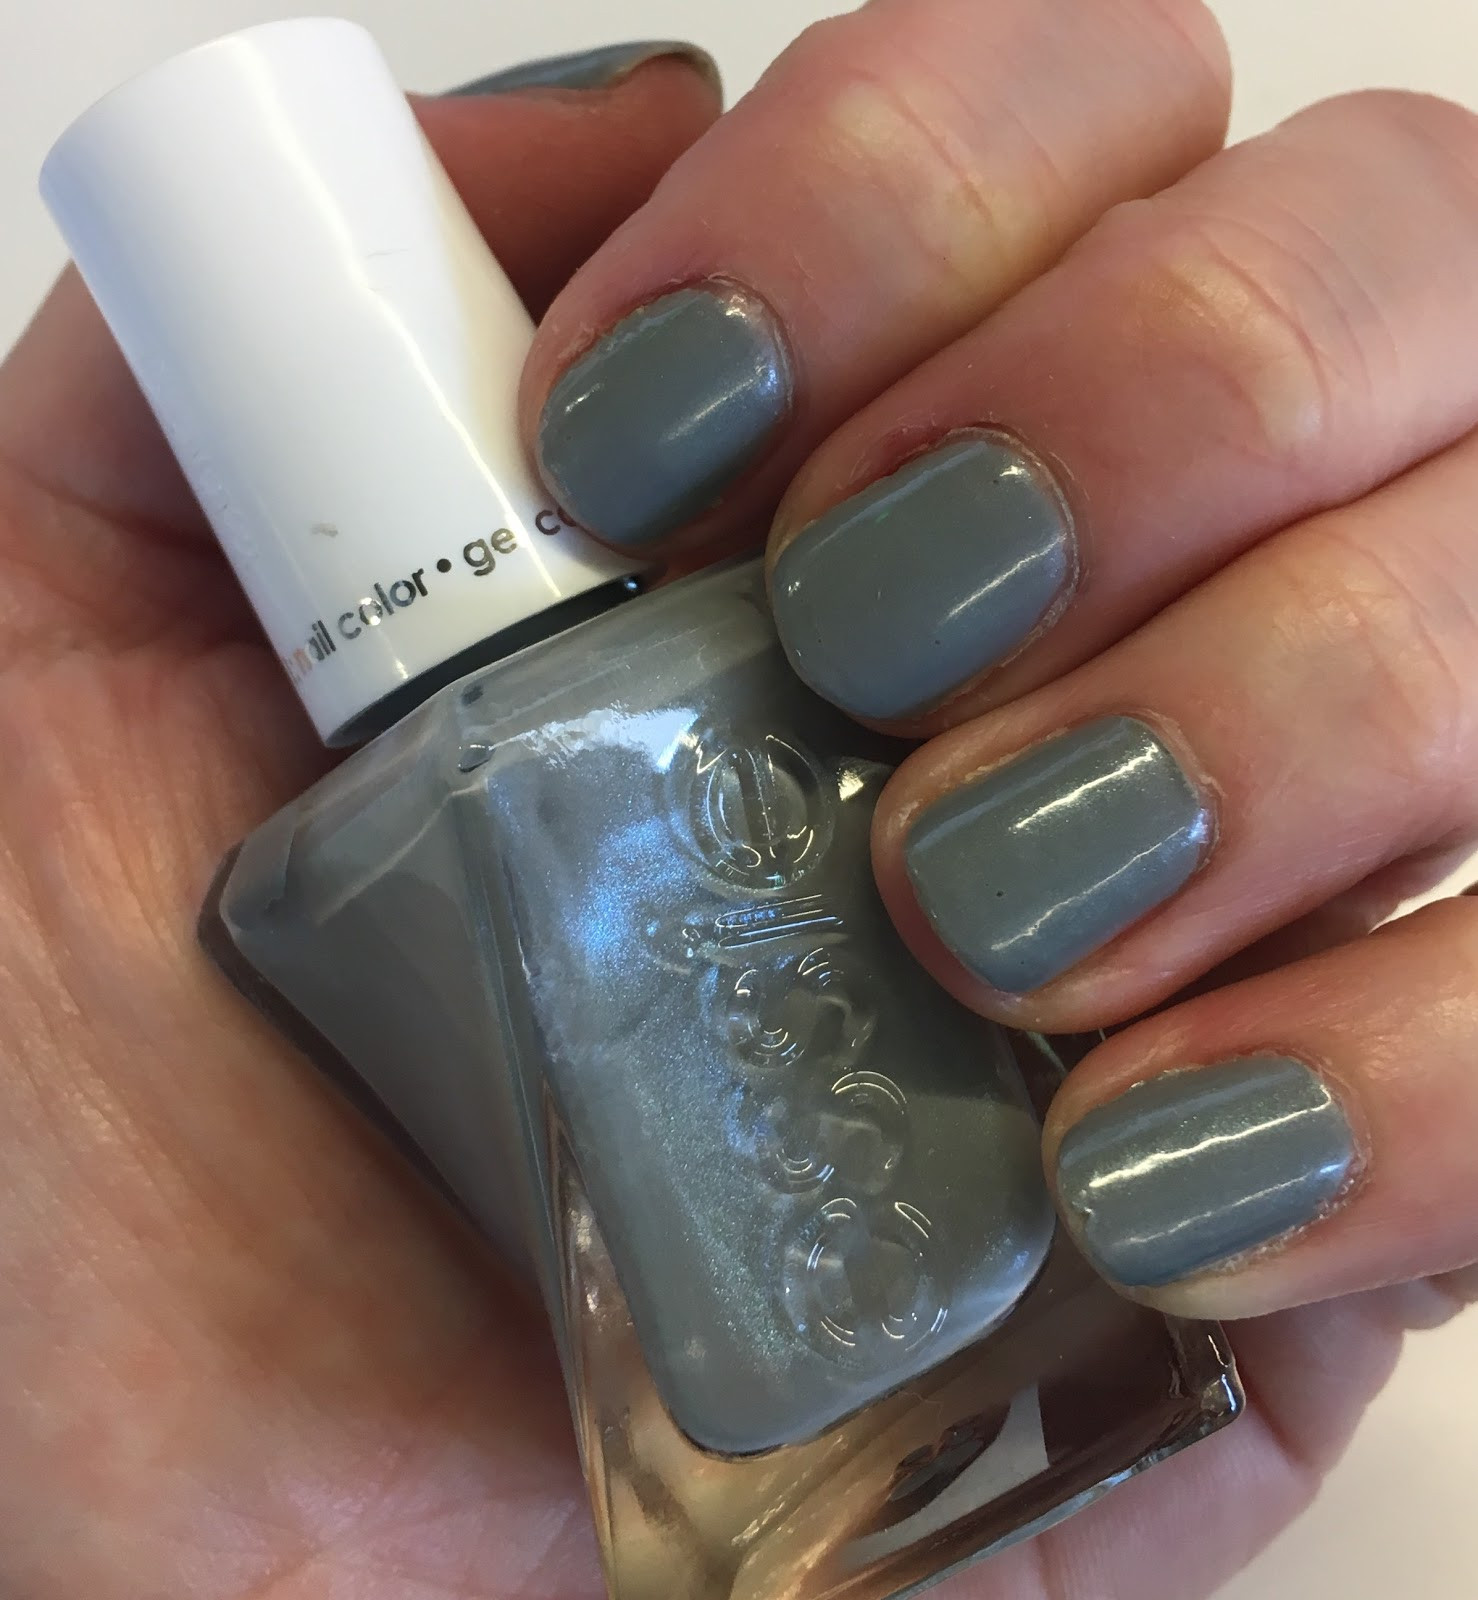 Essie Gel Nail Colors
 The Beauty of Life ManiMonday Essie Gel Couture Nail